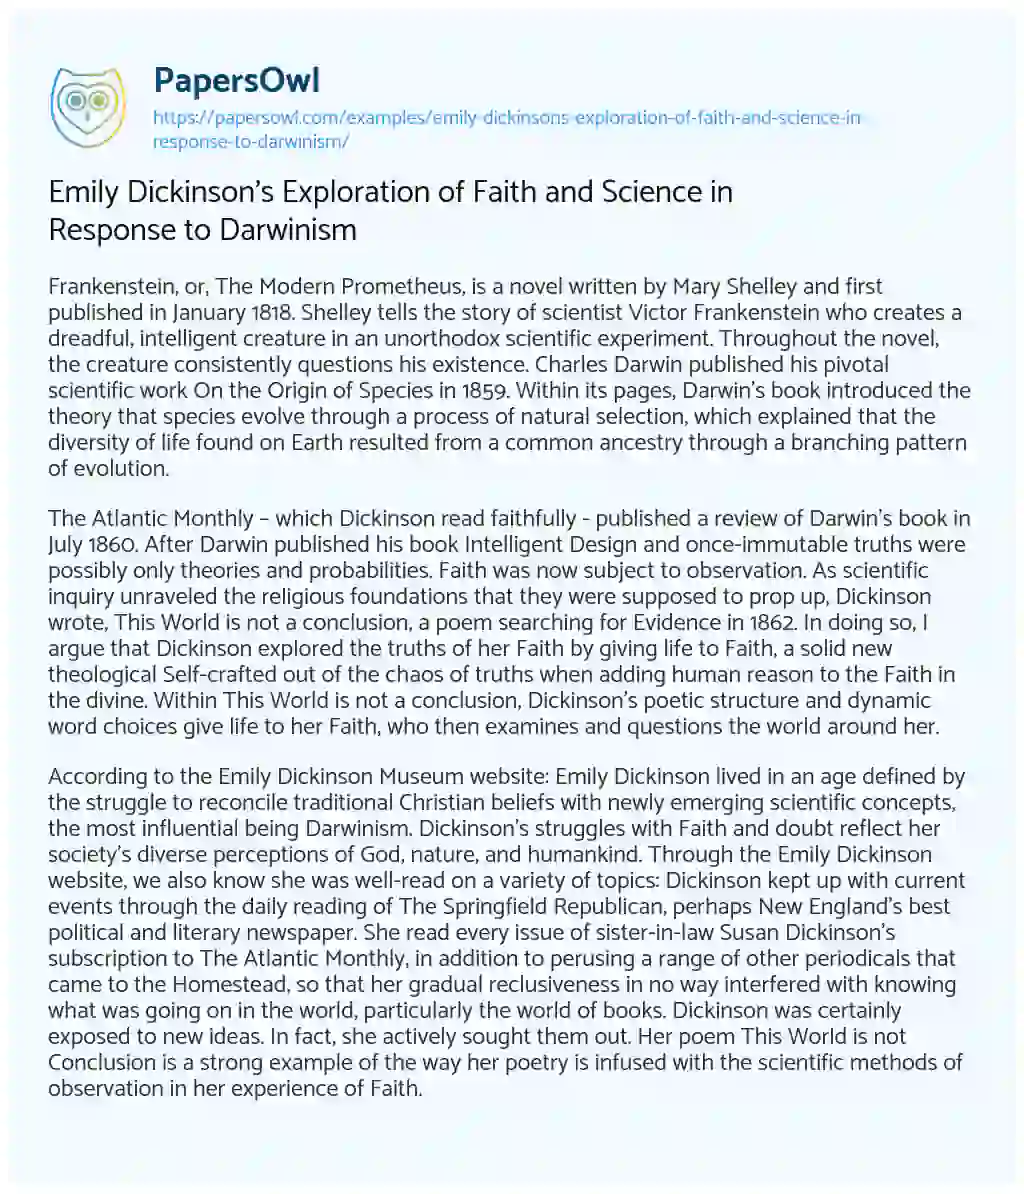 Essay on Emily Dickinson’s Exploration of Faith and Science in Response to Darwinism